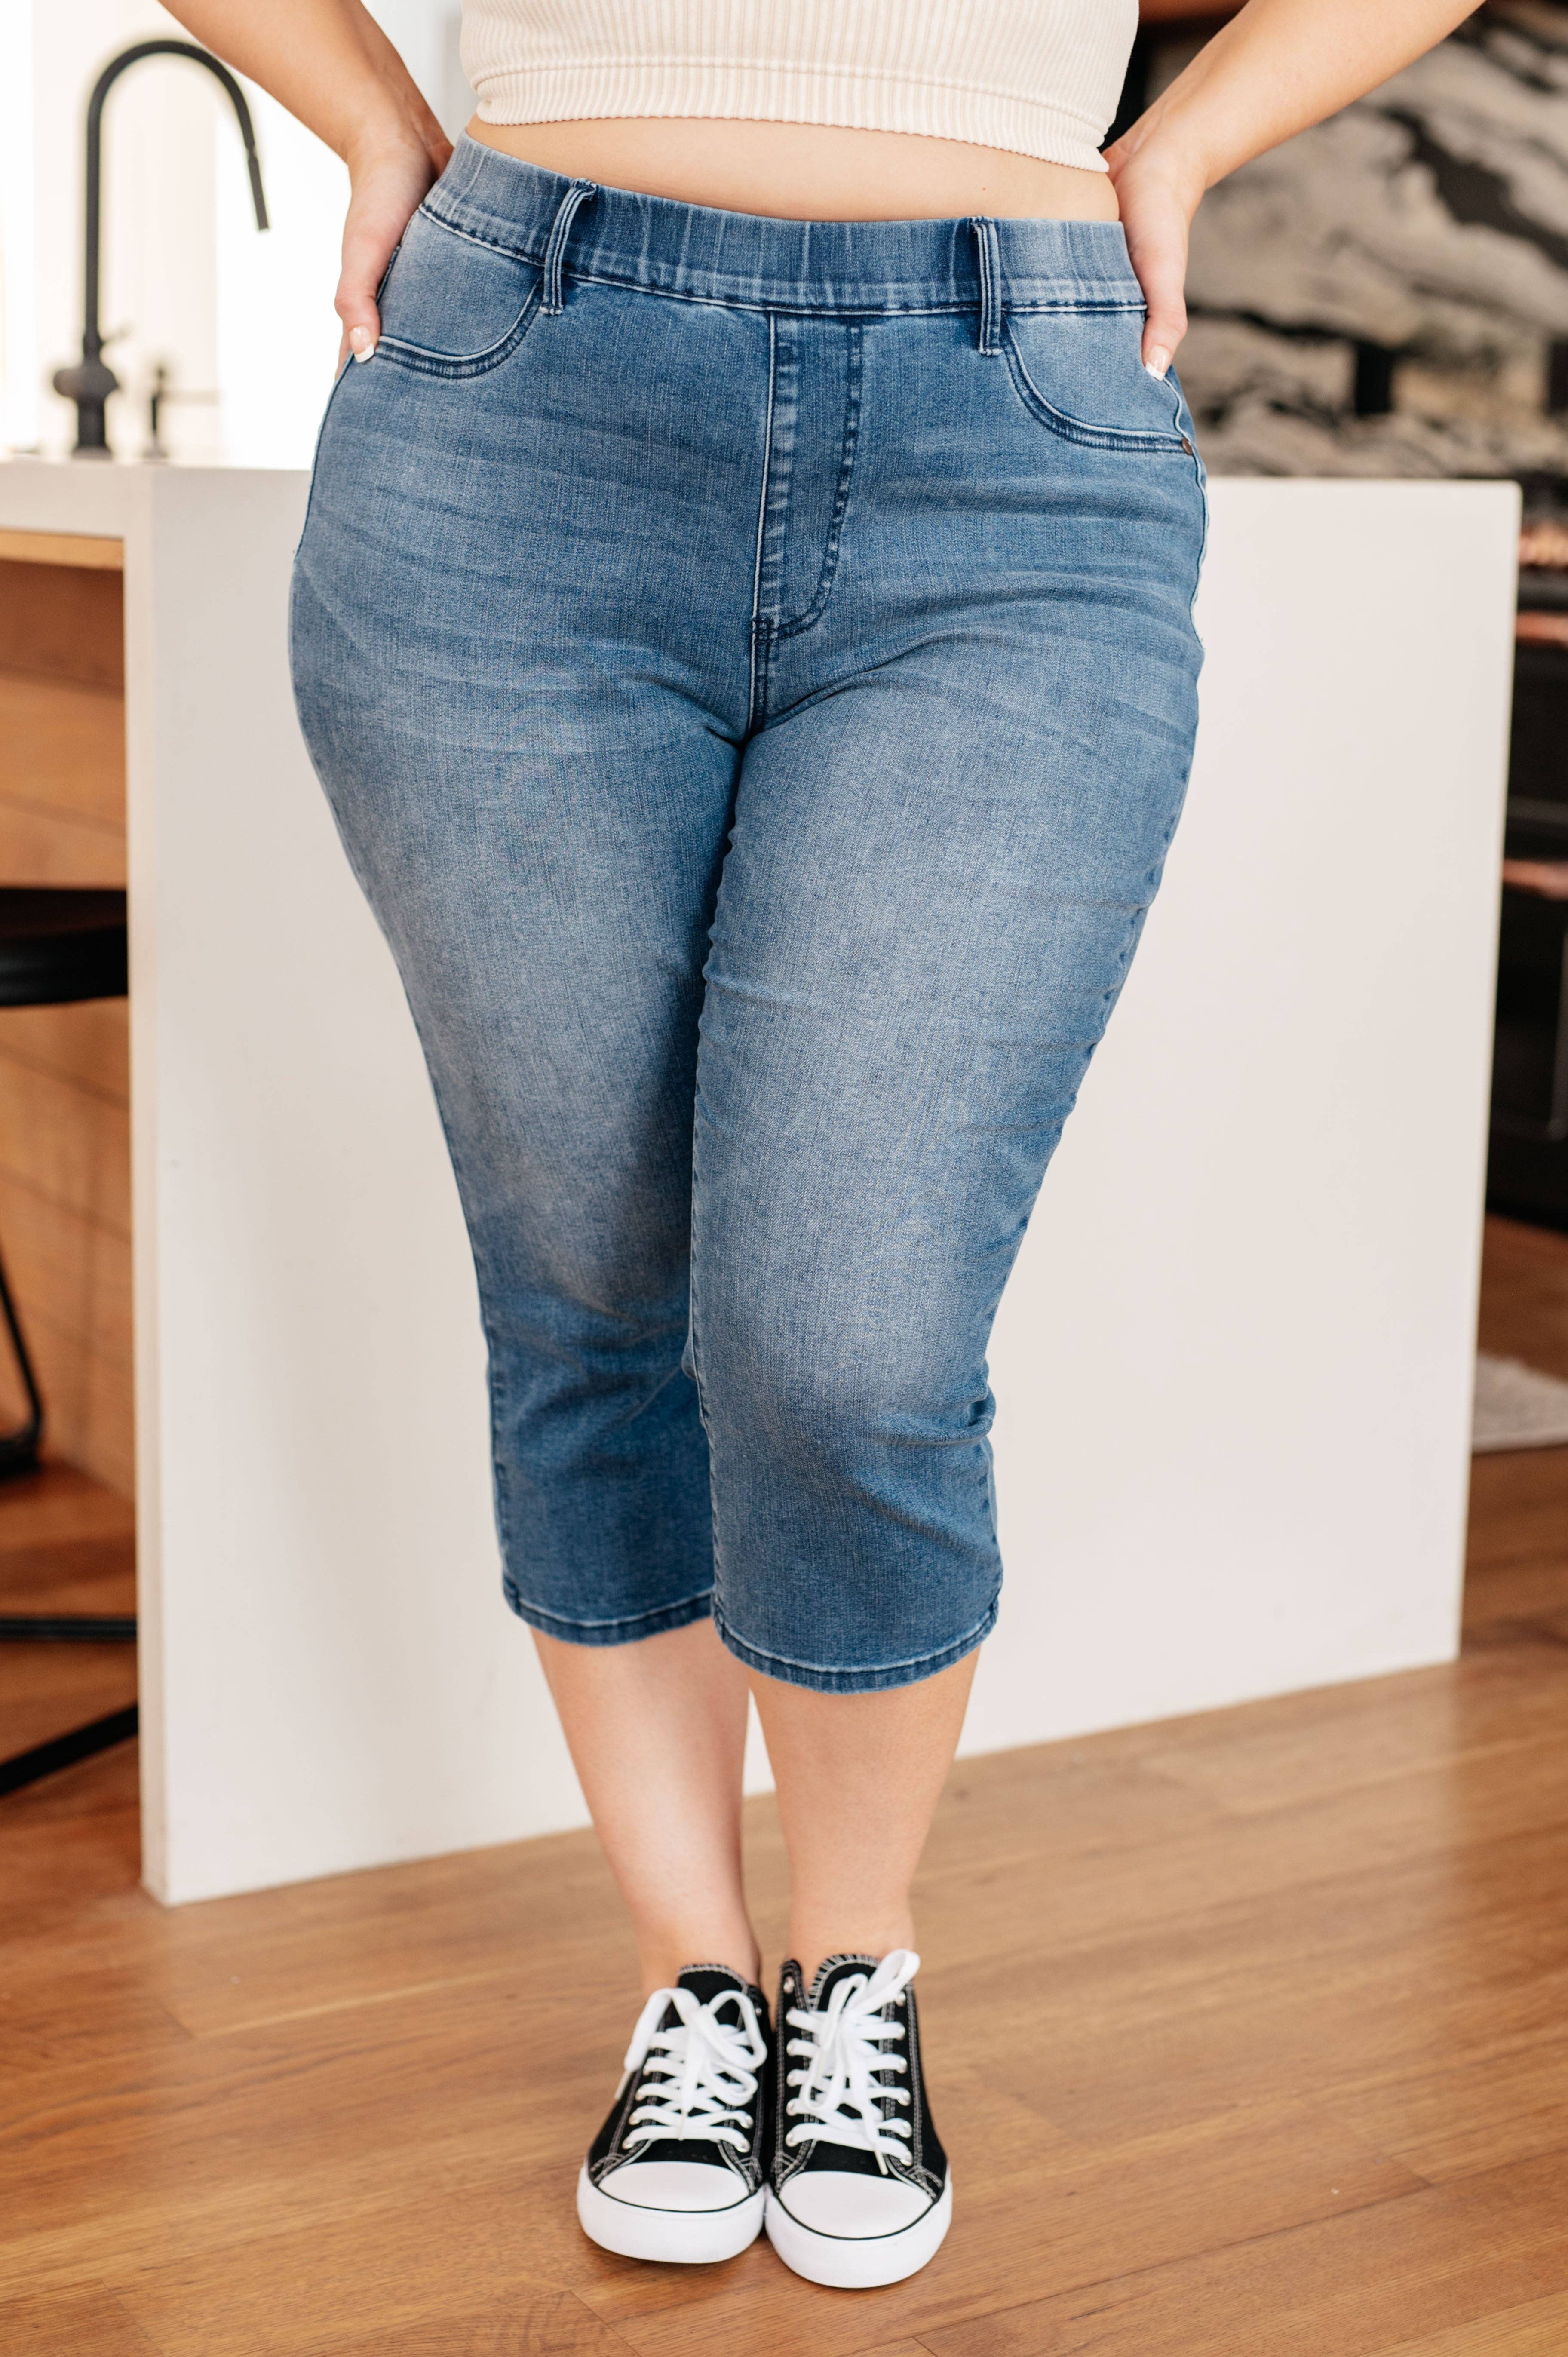 Wholesale jeans bbl For A Pull-On Classic Look 